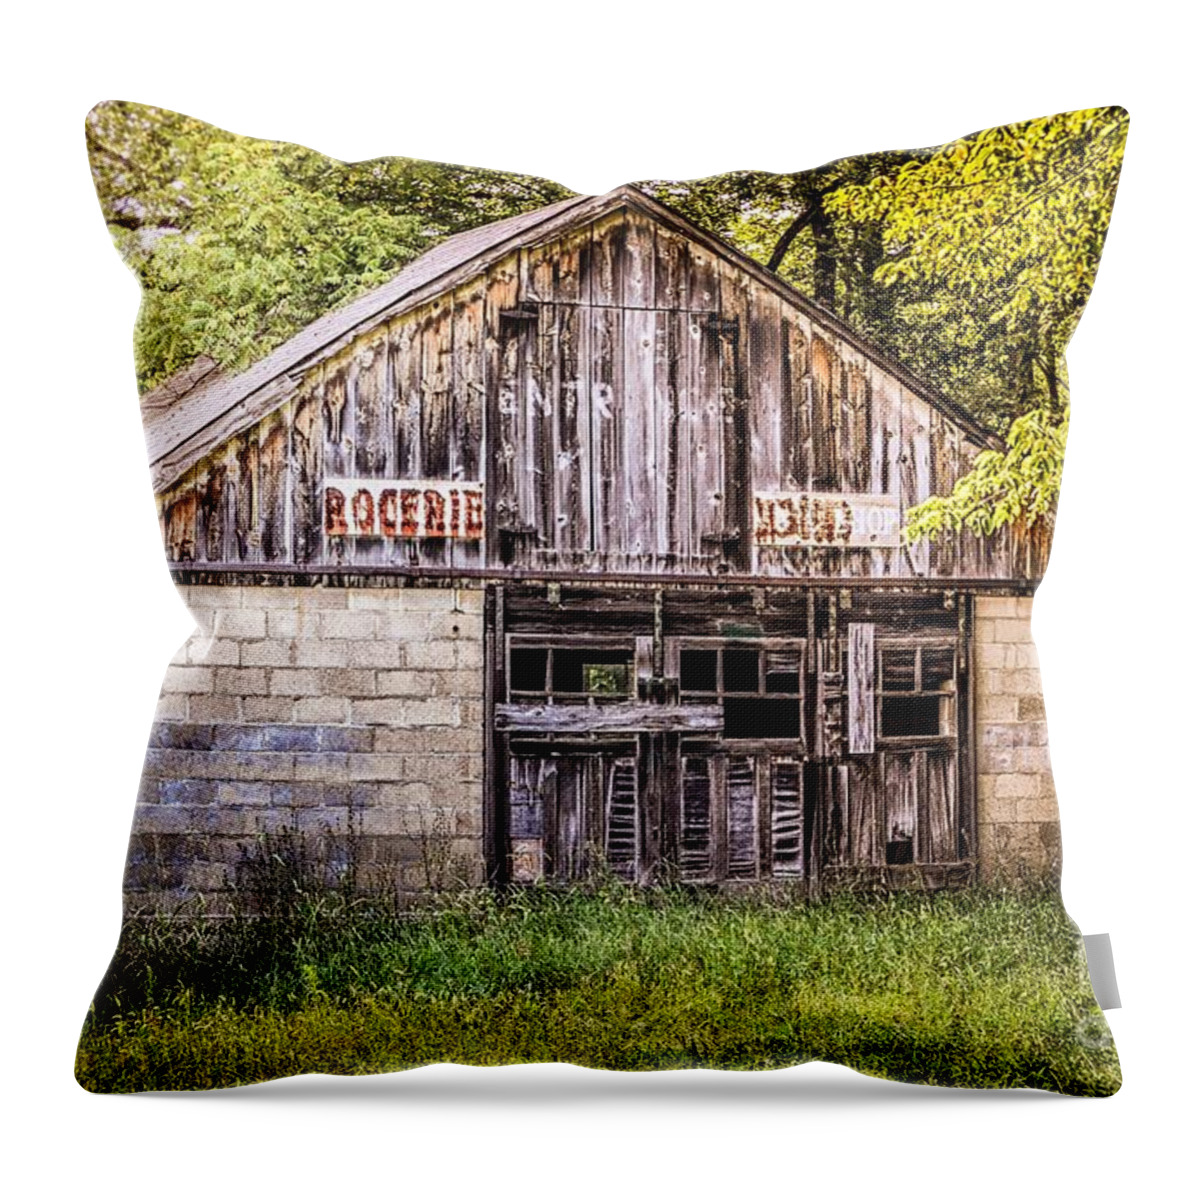 Vintage Landscape Throw Pillow featuring the photograph Antique Grocery Store by Peggy Franz